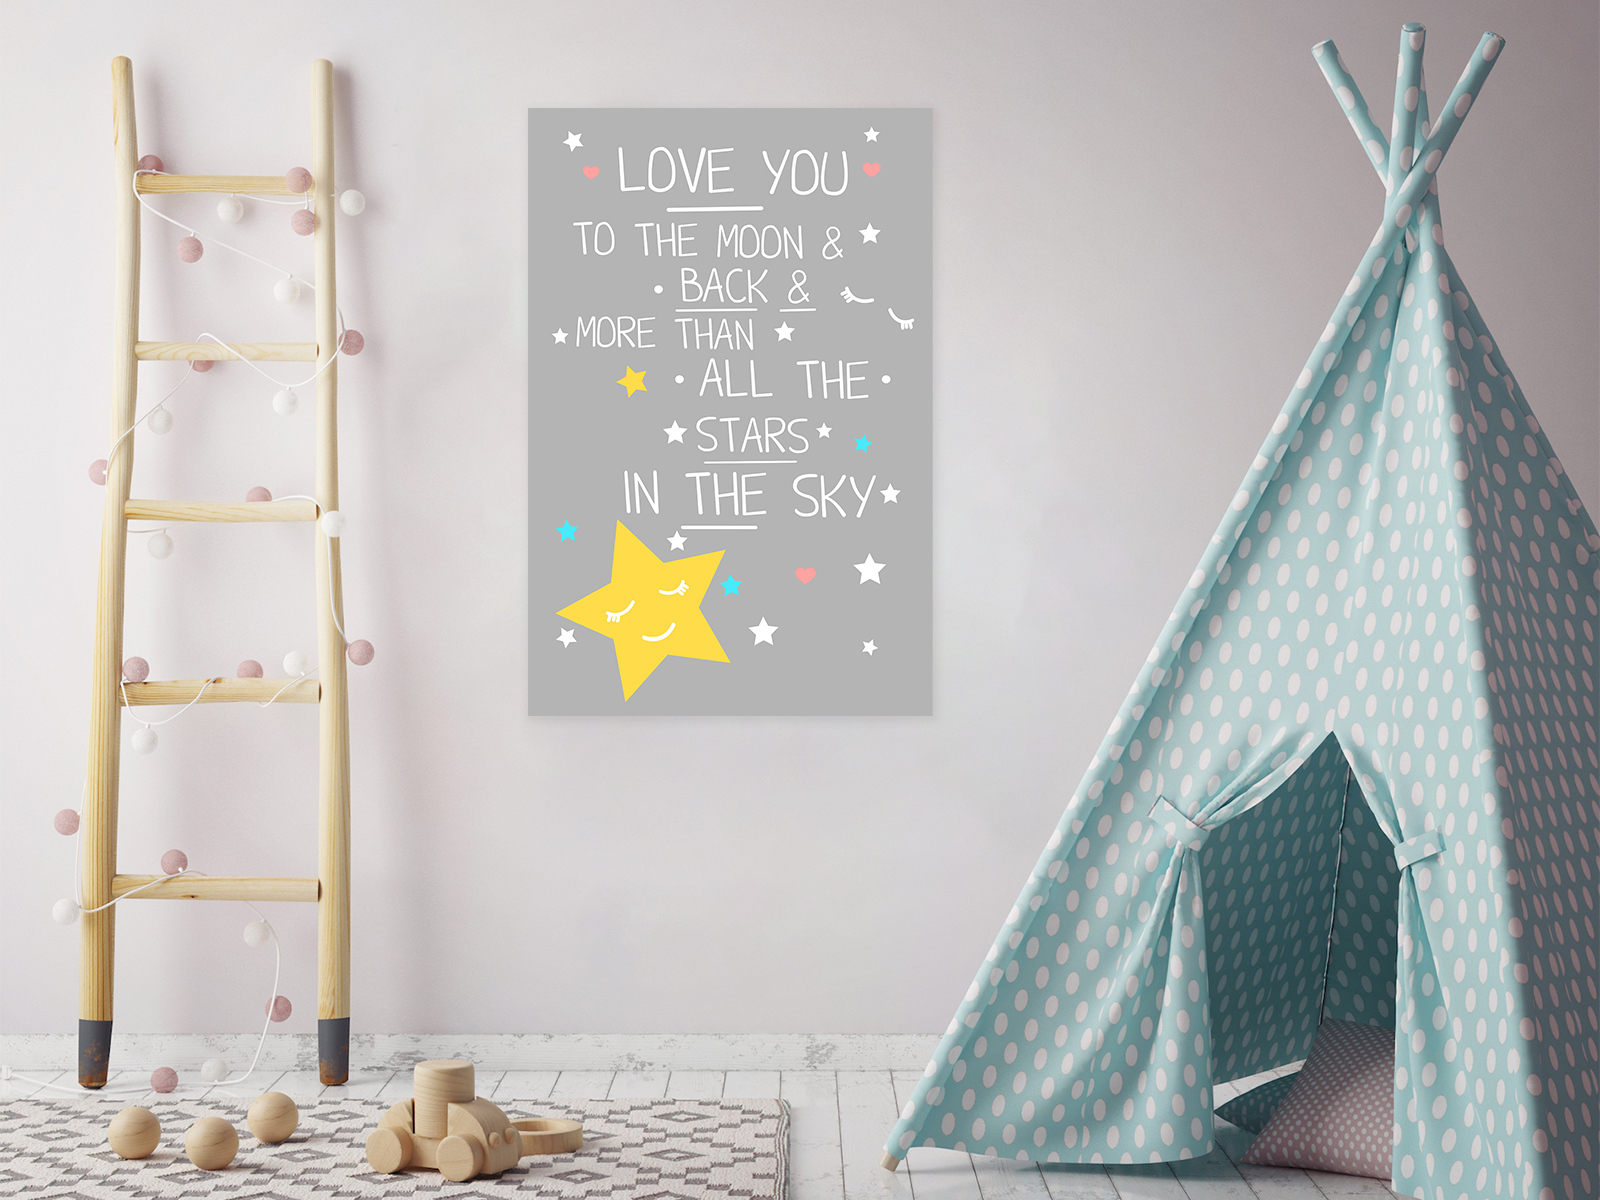 Awkward Styles Love Quotes for Kids Cute Quotes Baby Kids Room Newborn Baby Gifts Love You To The Moon & Back More Than All The Stars In The Sky Unframed Poster Unframed Poster for Kids Nursery Room - image 3 of 3